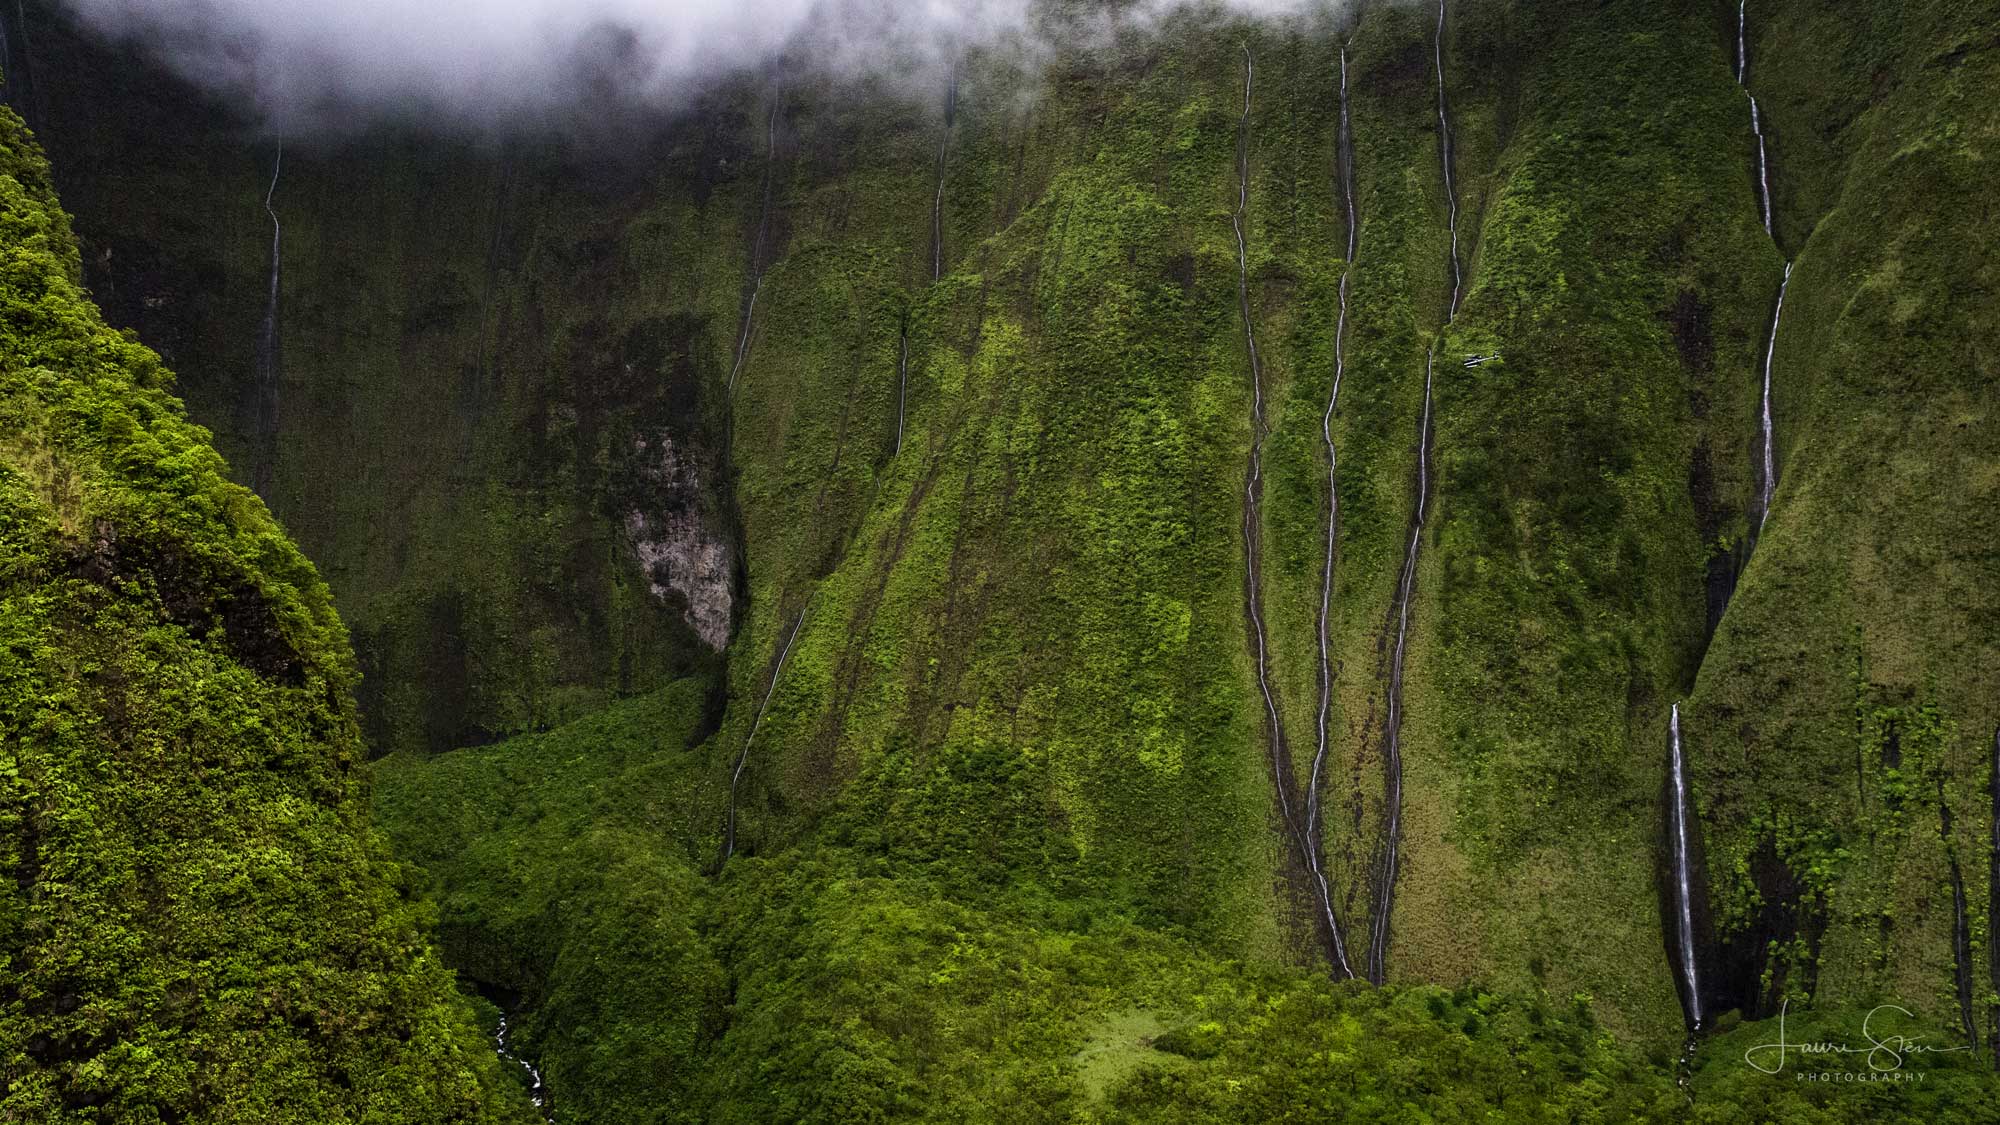 Photograph of cliffs on Mount Wai'ale'ale, Kaua'i. The photo shows sheer green walls covered with green vegetation. Thin waterfalls can be seen cutting through the vegetation on the slopes.